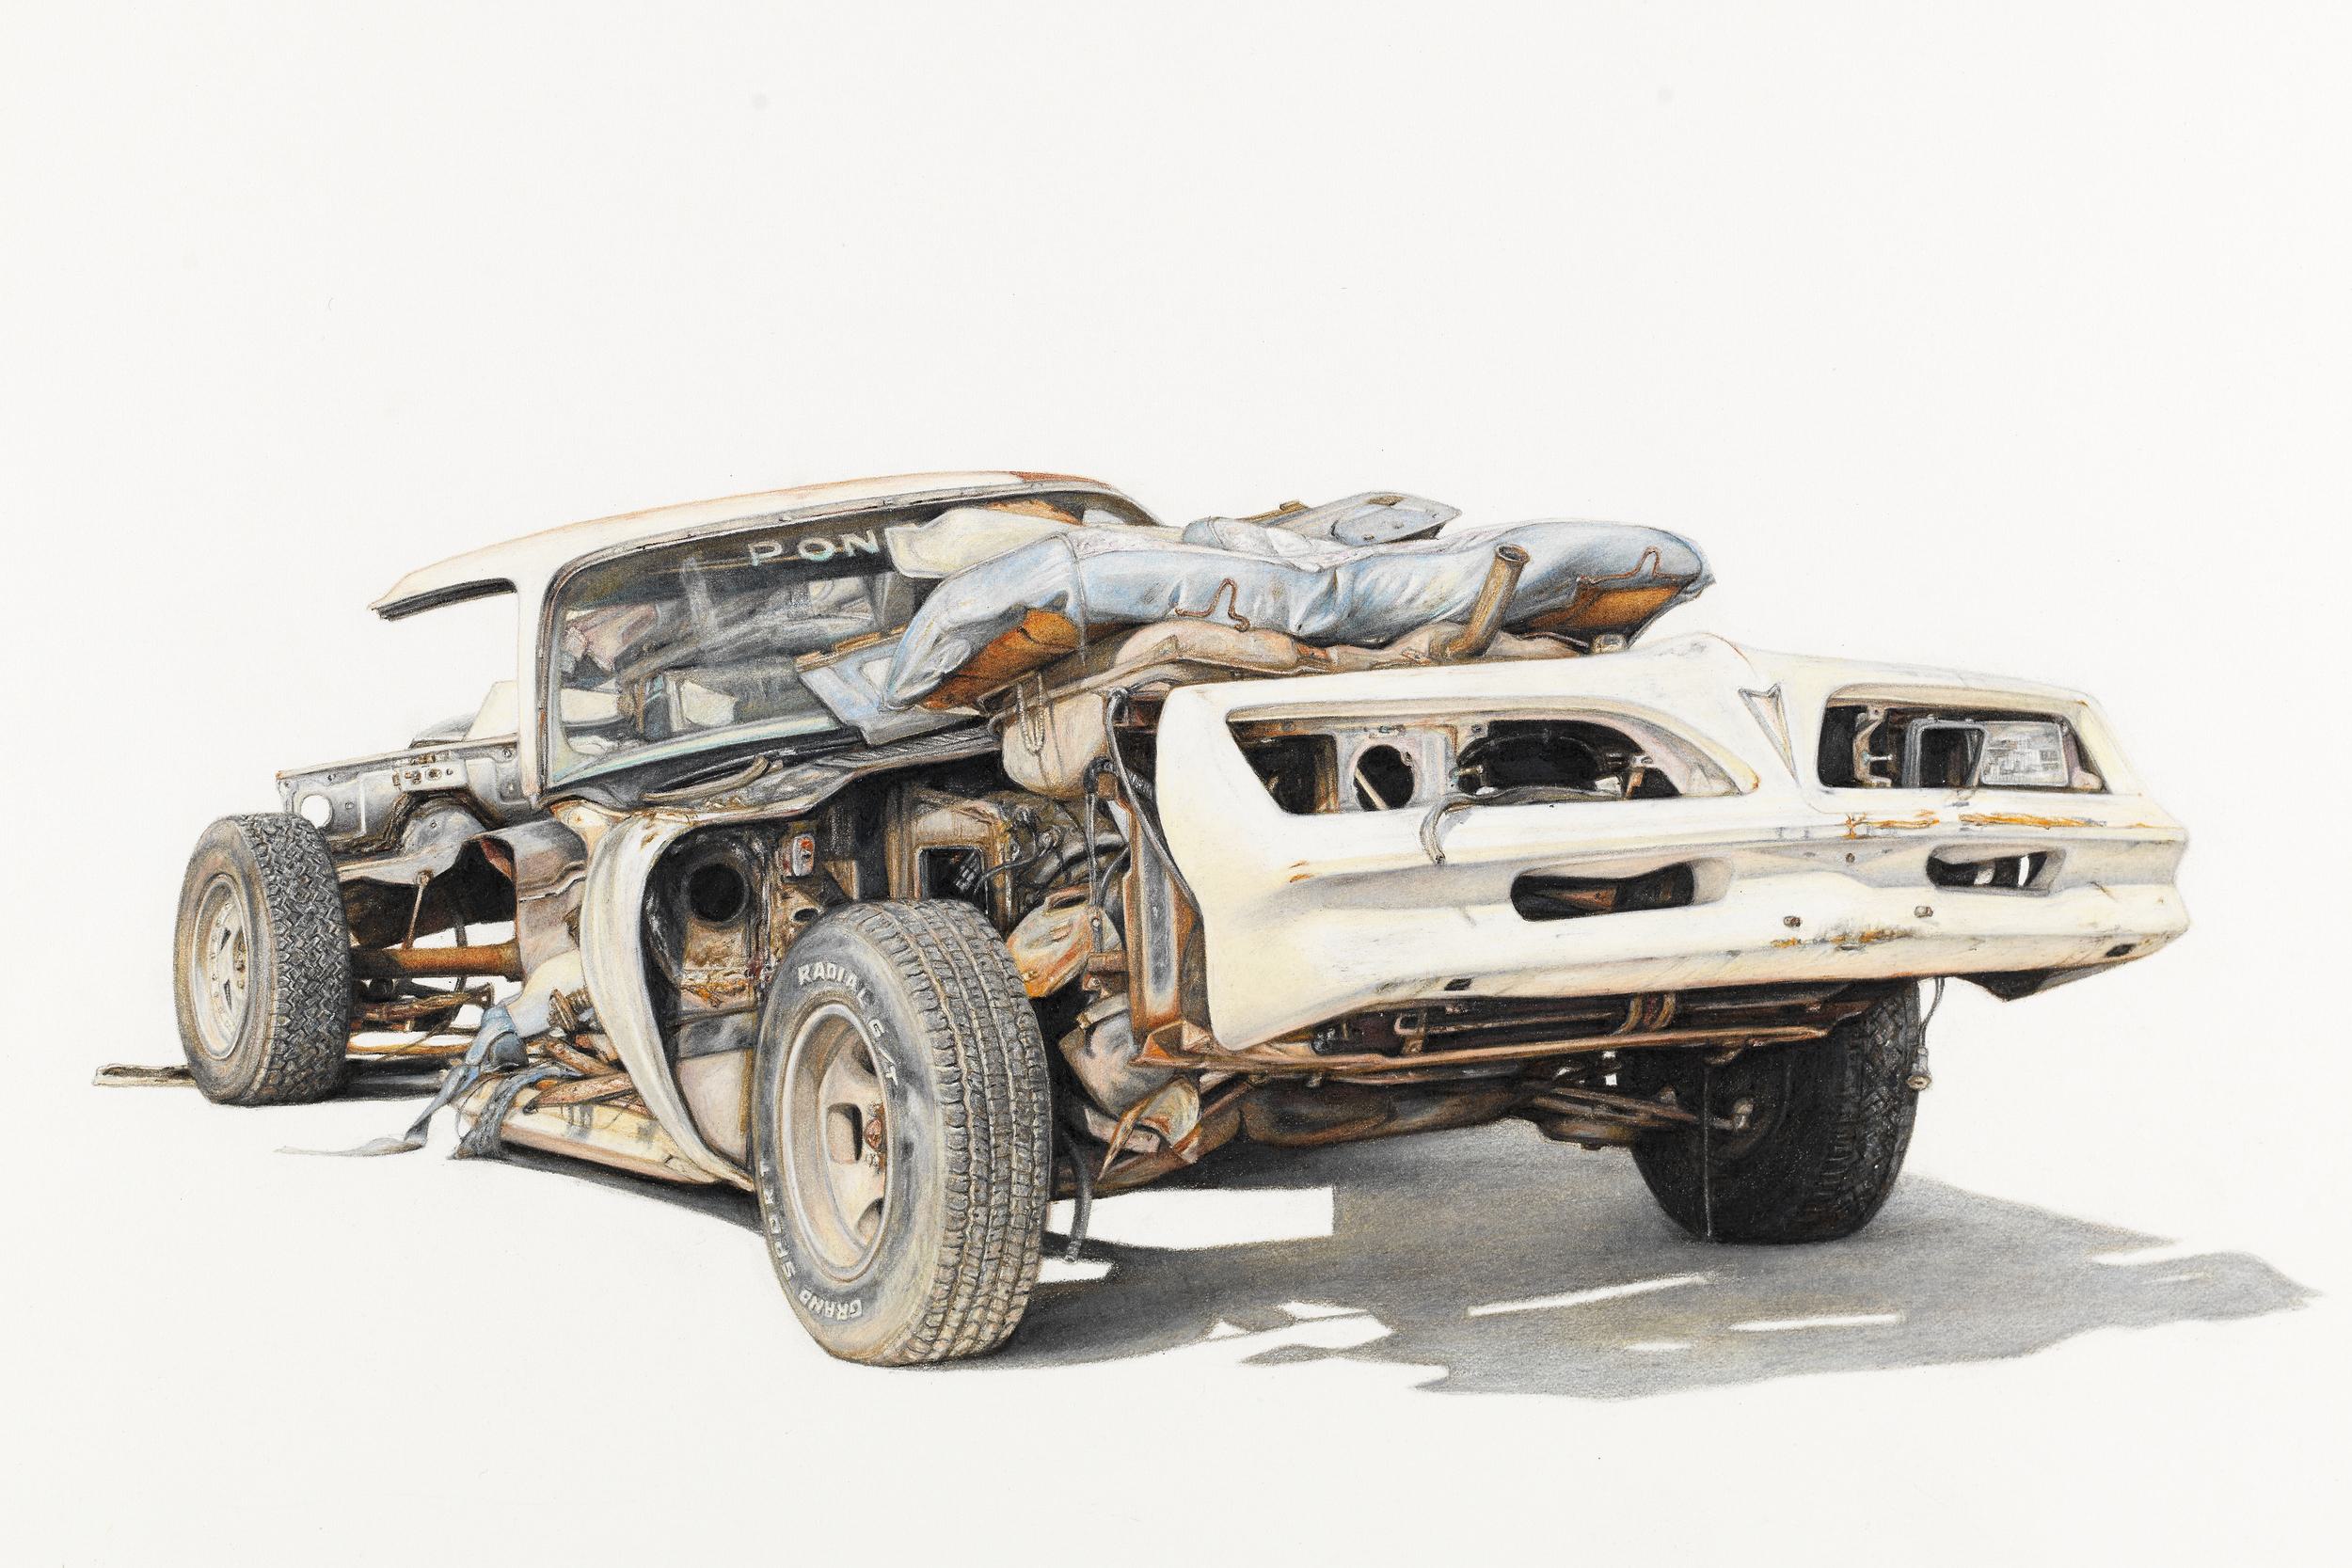 The Illustrated Wastelands of Paul White